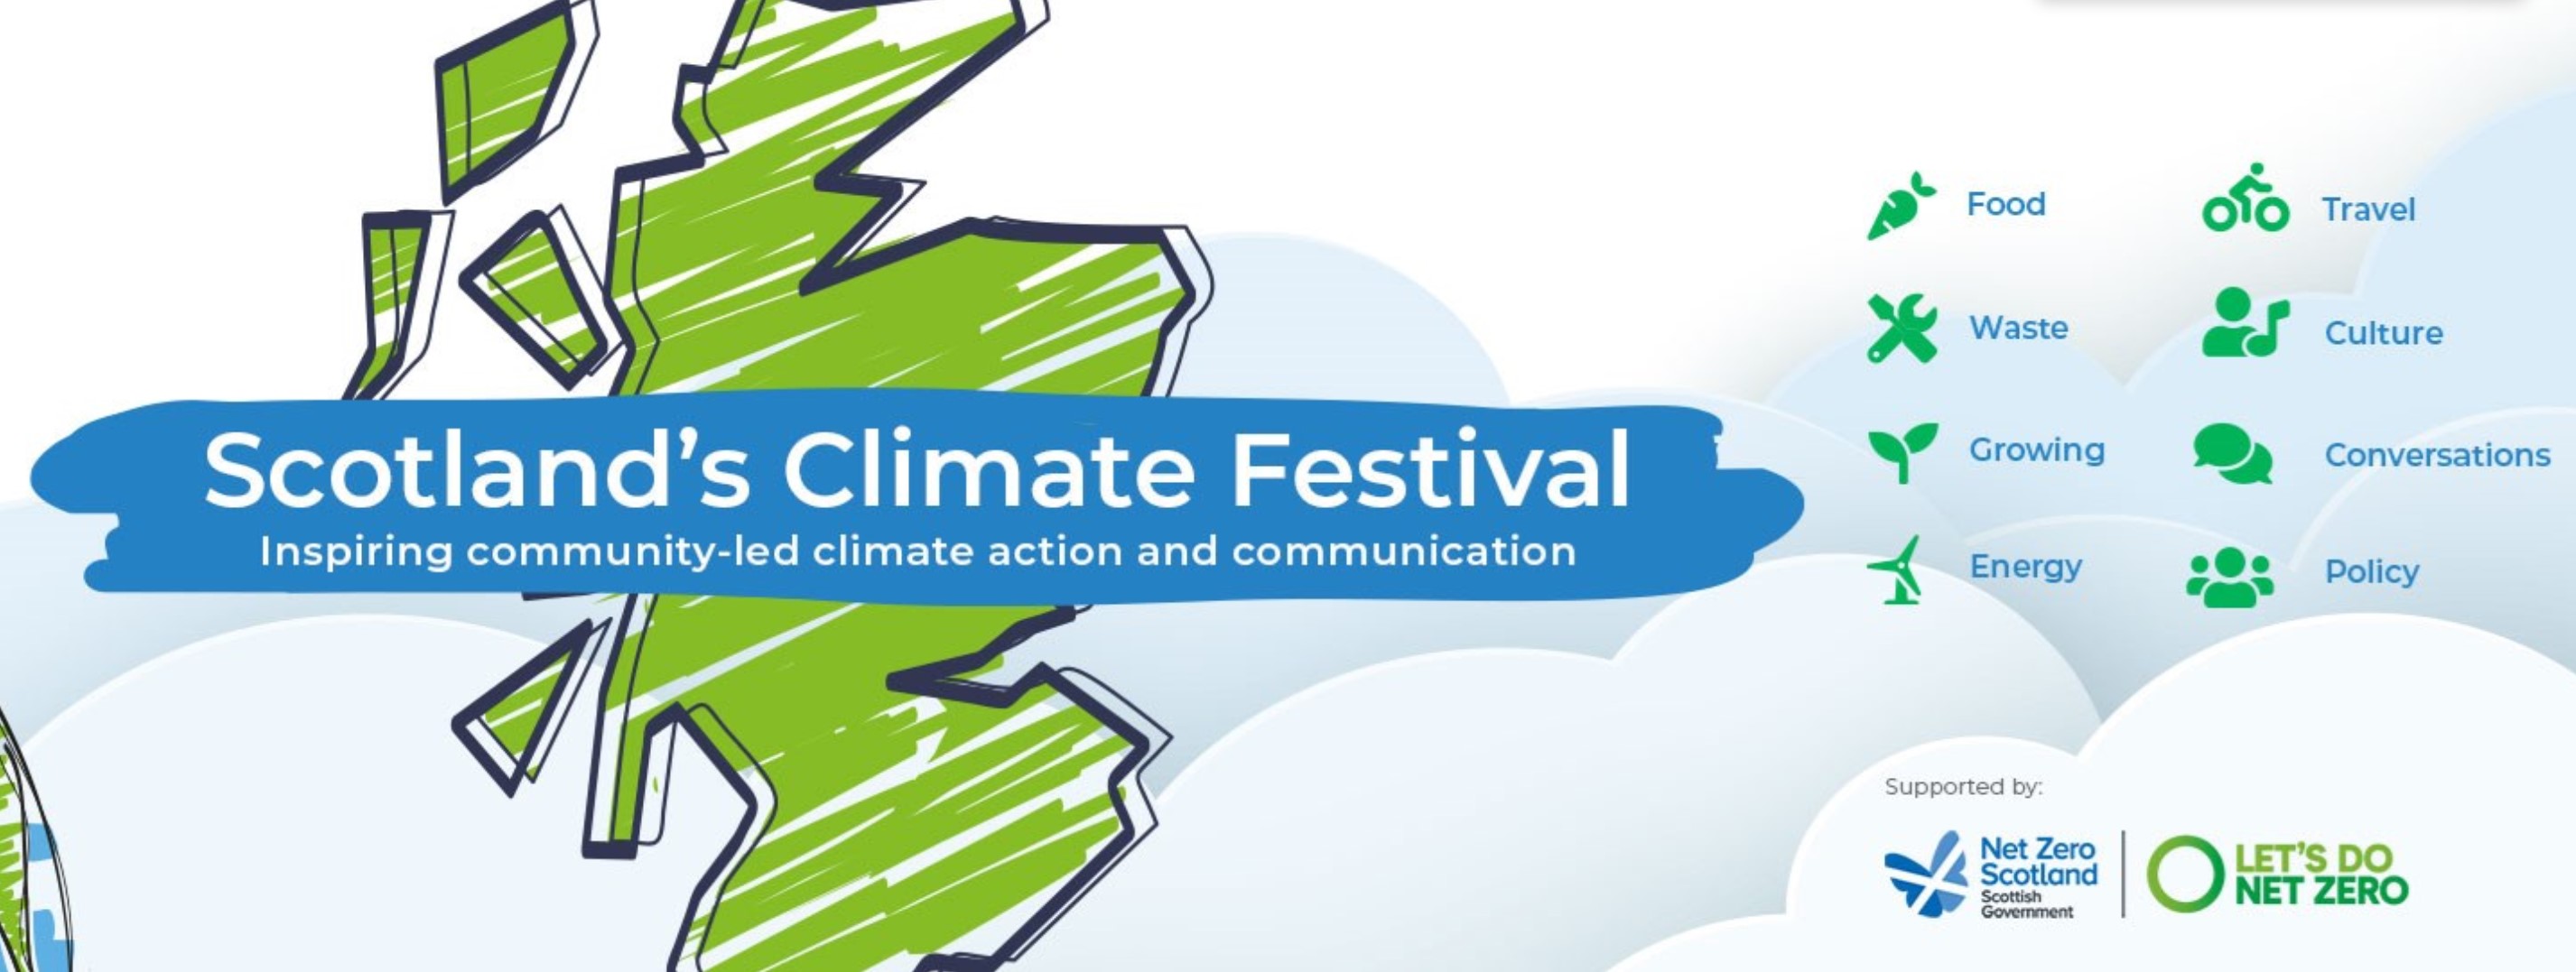 Drawing of map of Scotland with Climate Festival logo